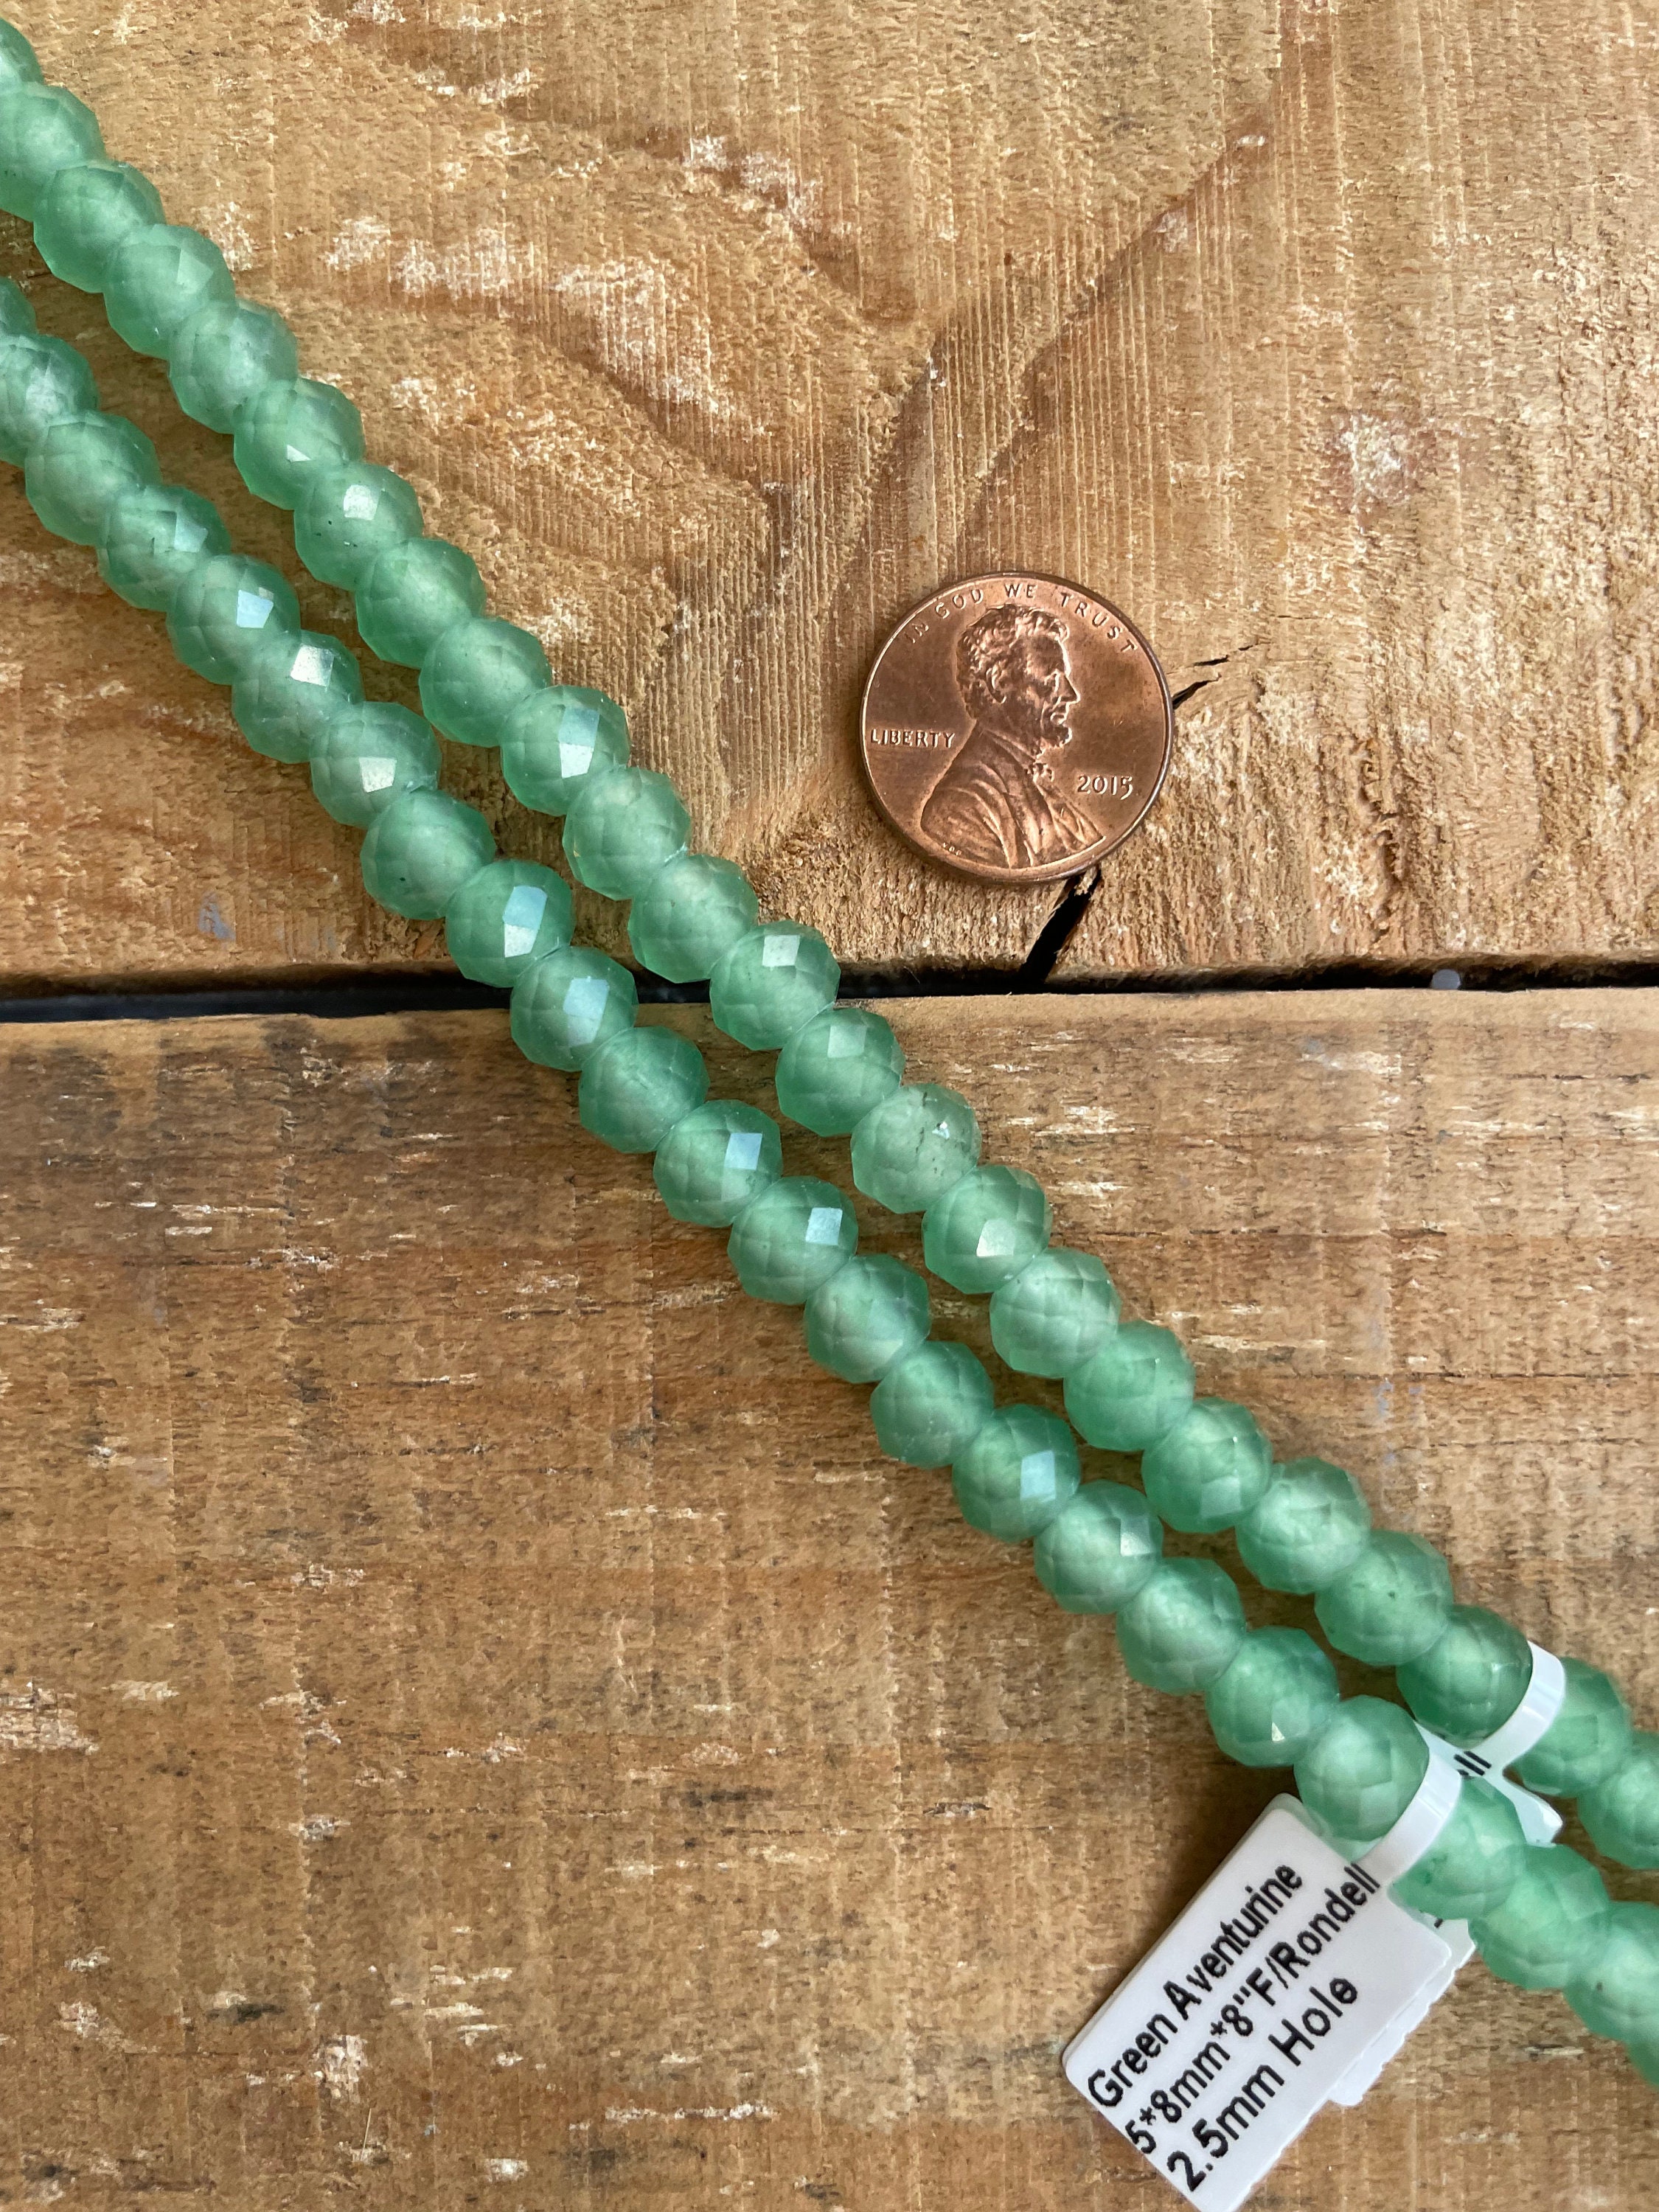 LIFAVOVY 8mm Natural Green Aventurine Beads Round Gemstone Loose Beads for Jewelry Making (47-50pcsstrand)